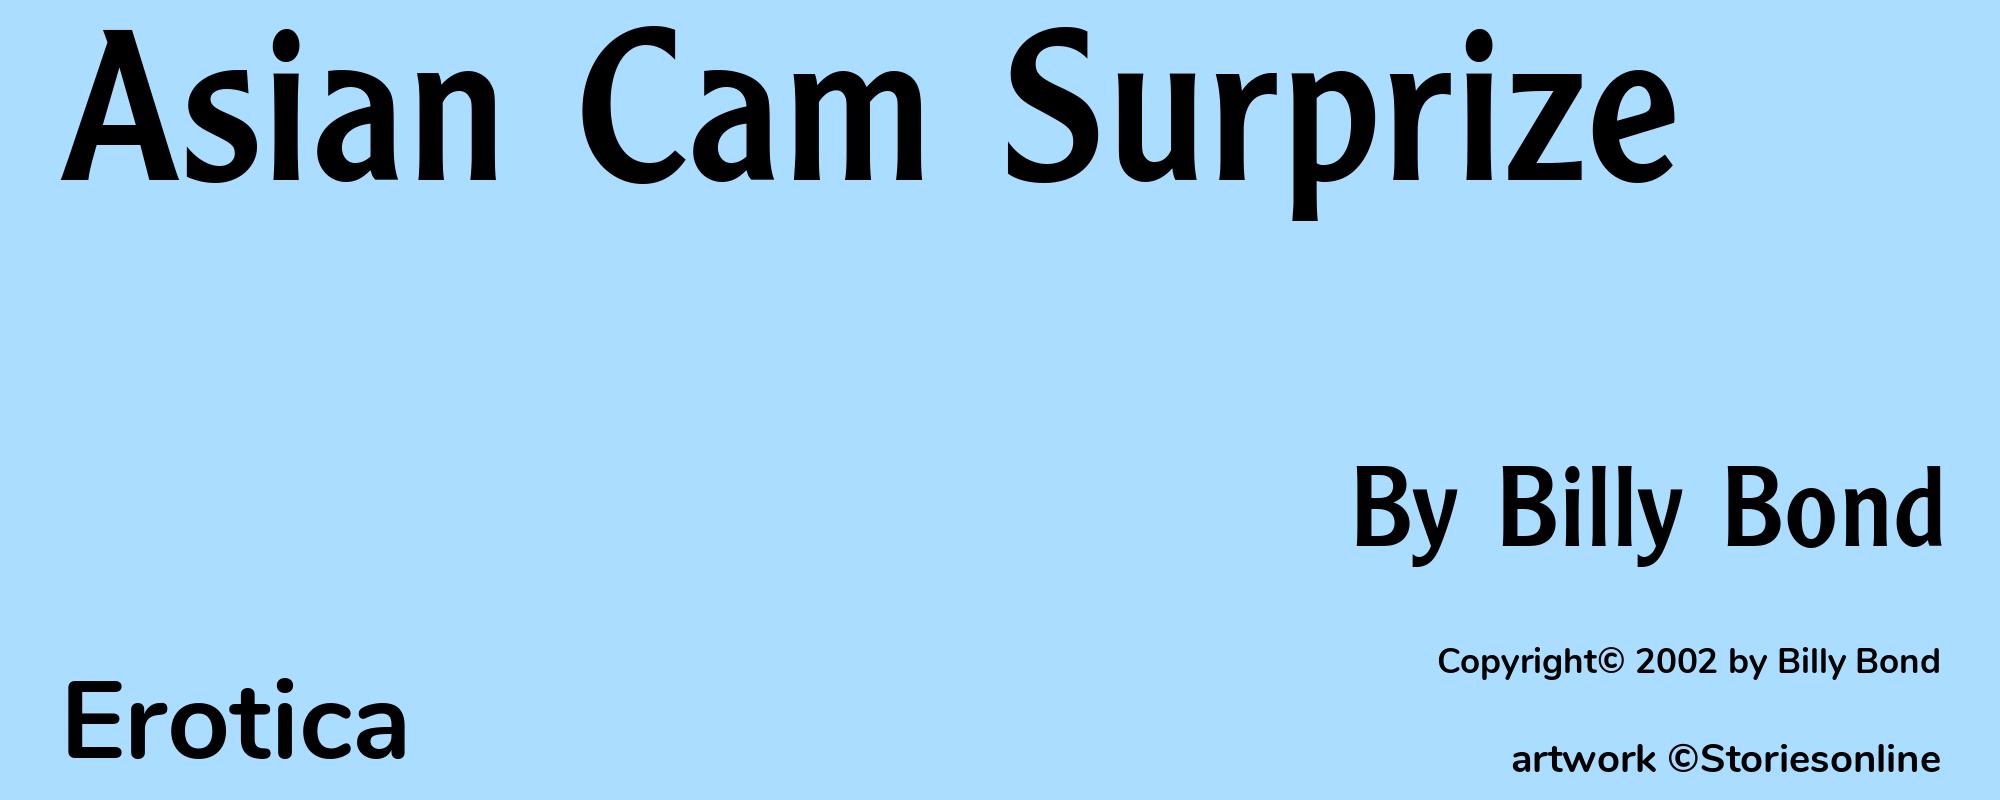 Asian Cam Surprize - Cover